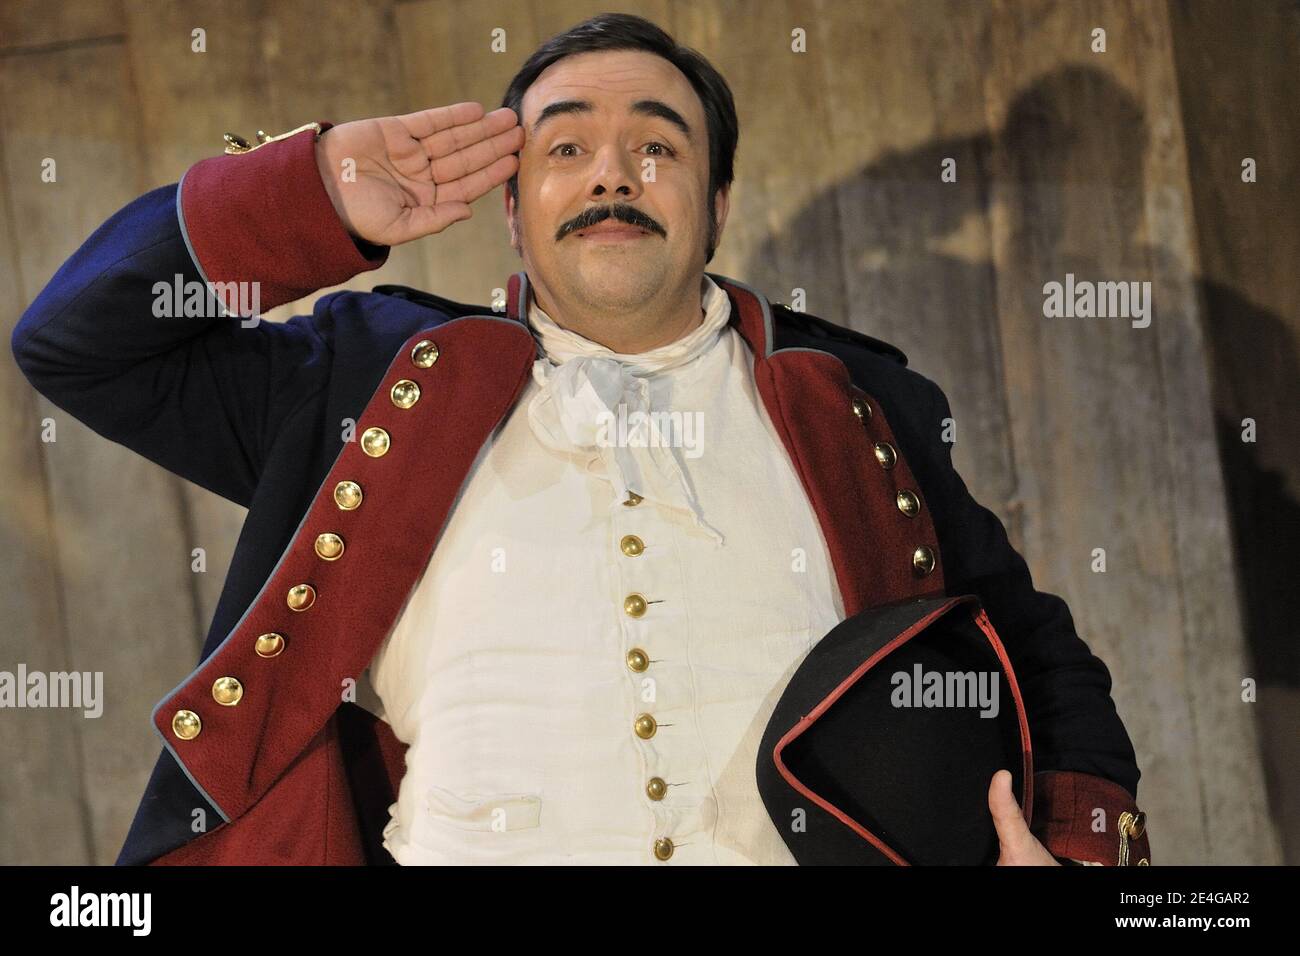 Benoit de Gaulejac ( Sergent Garcia) performing during a presentation of 'Zorro the musical', at the Folies Bergere theatre in Paris, France on November 4, 2009. Photo by Nicolas Genin/ABACAPRESS.COM Stock Photo